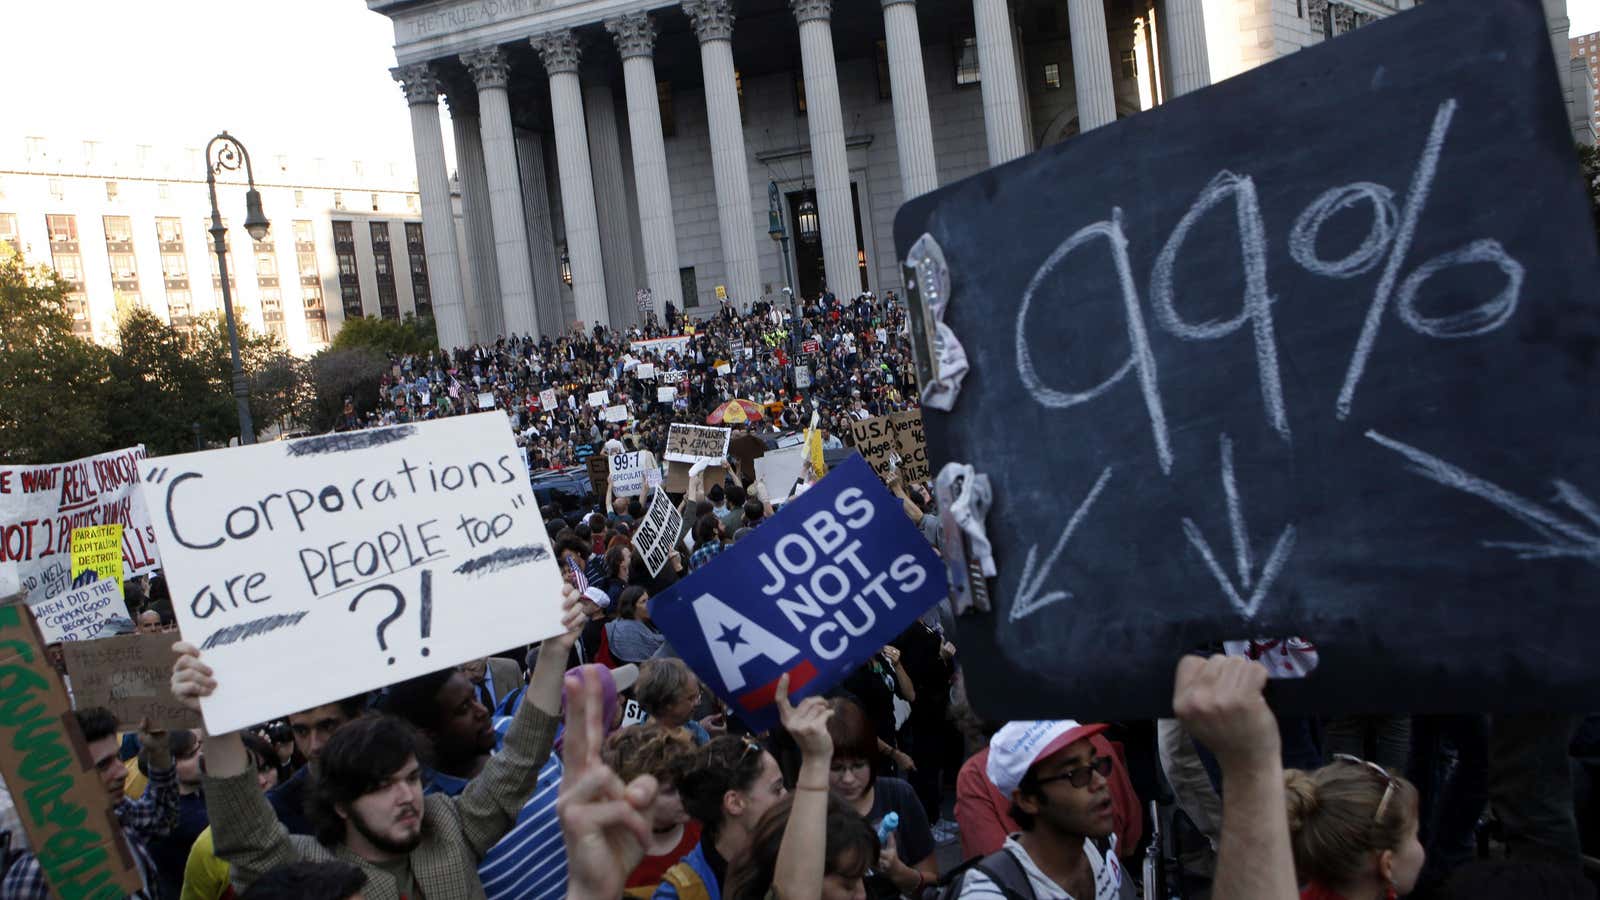 The Occupy Wall Street movement is often given credit for re-igniting American populism.